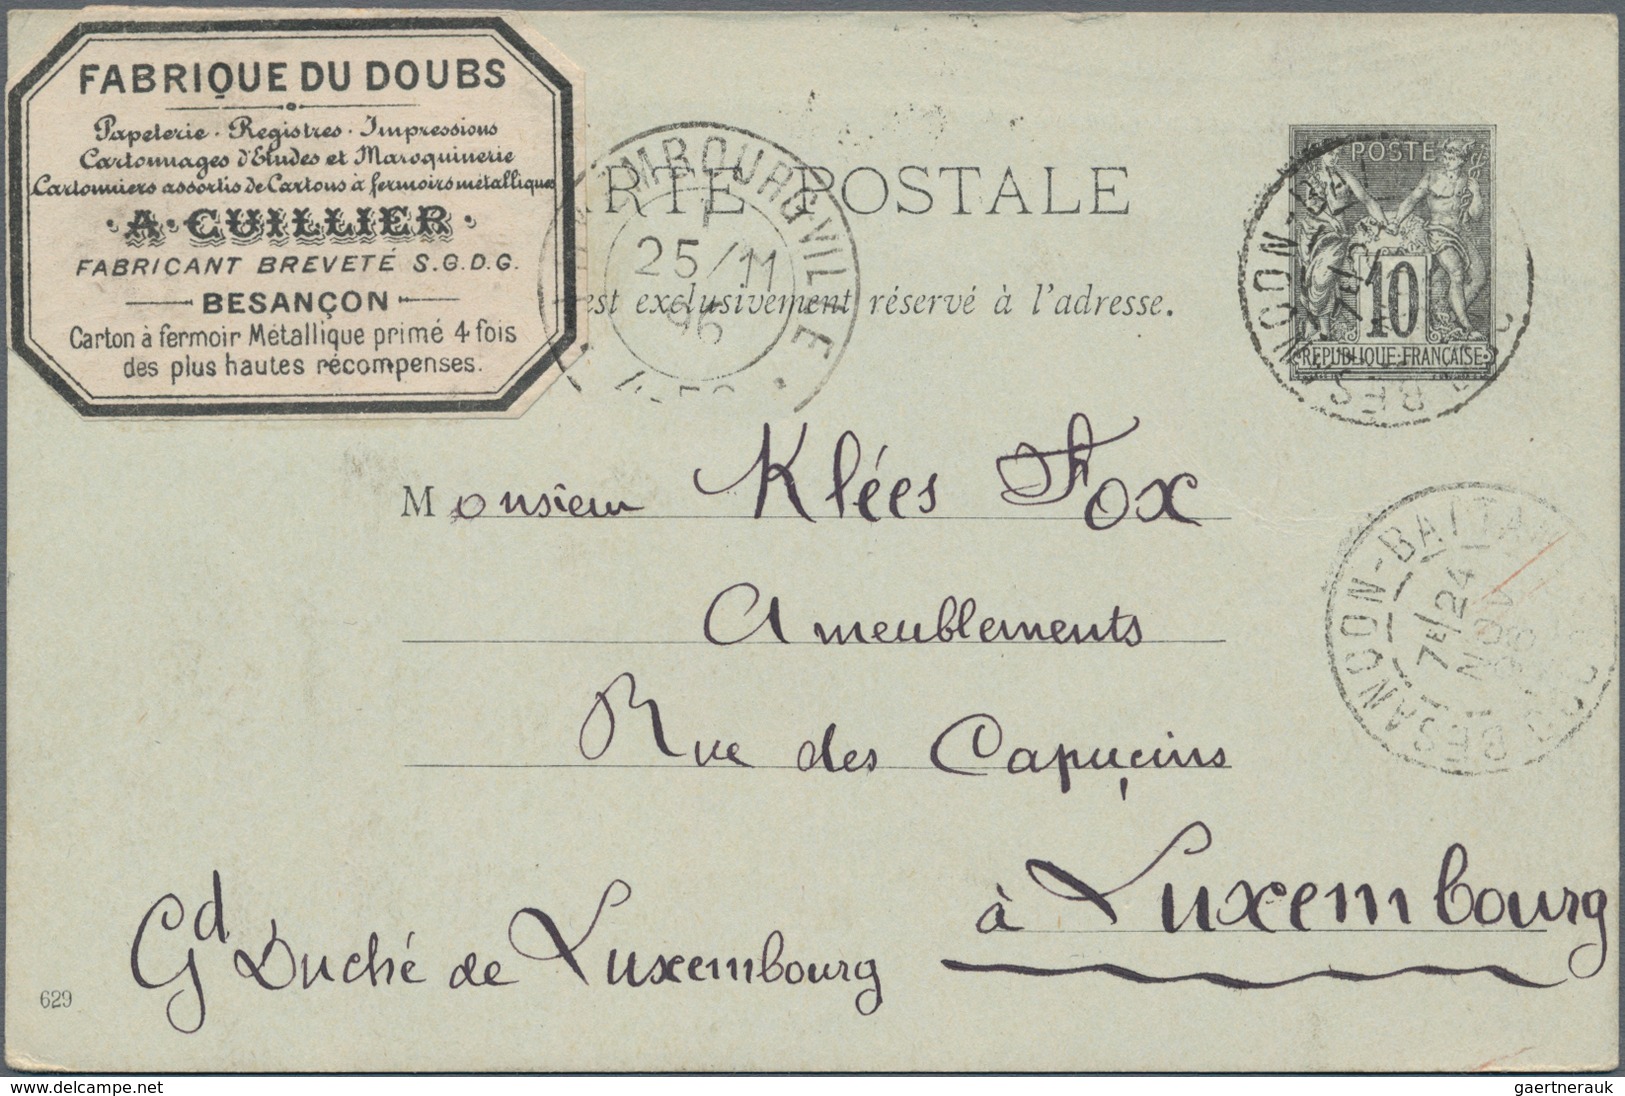 Frankreich - Ganzsachen: 1883/96 ca. 100 unused and used postal stationery postcards and lettercards